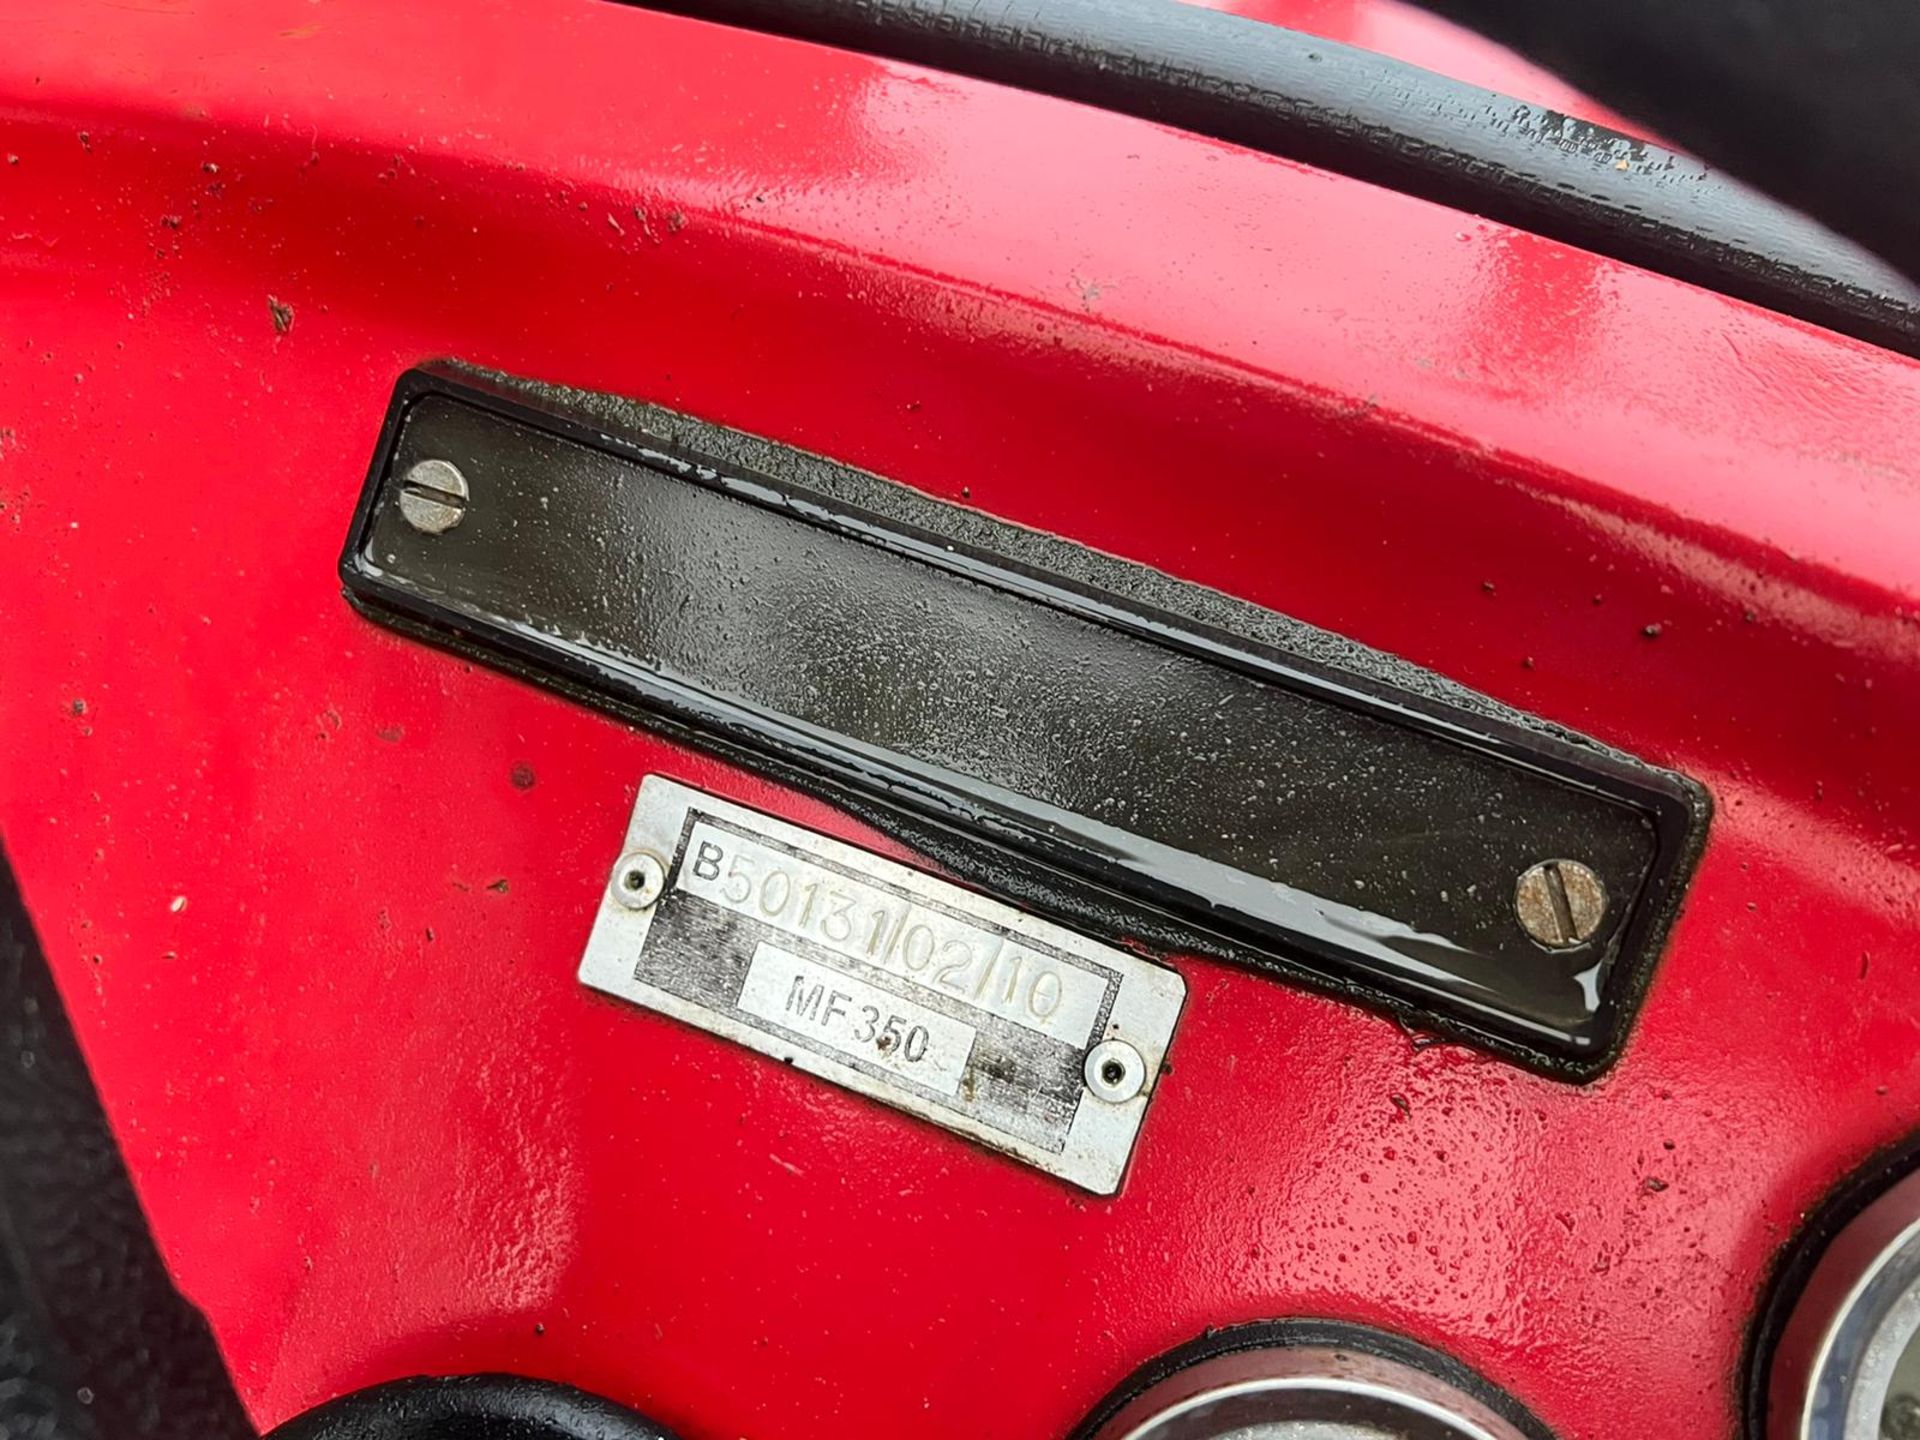 MASSEY FERGUSON 350 52hp 2WD TRACTOR, RUNS DRIVES AND WORKS, SHOWING A LOW 1200 HOURS - Image 12 of 16